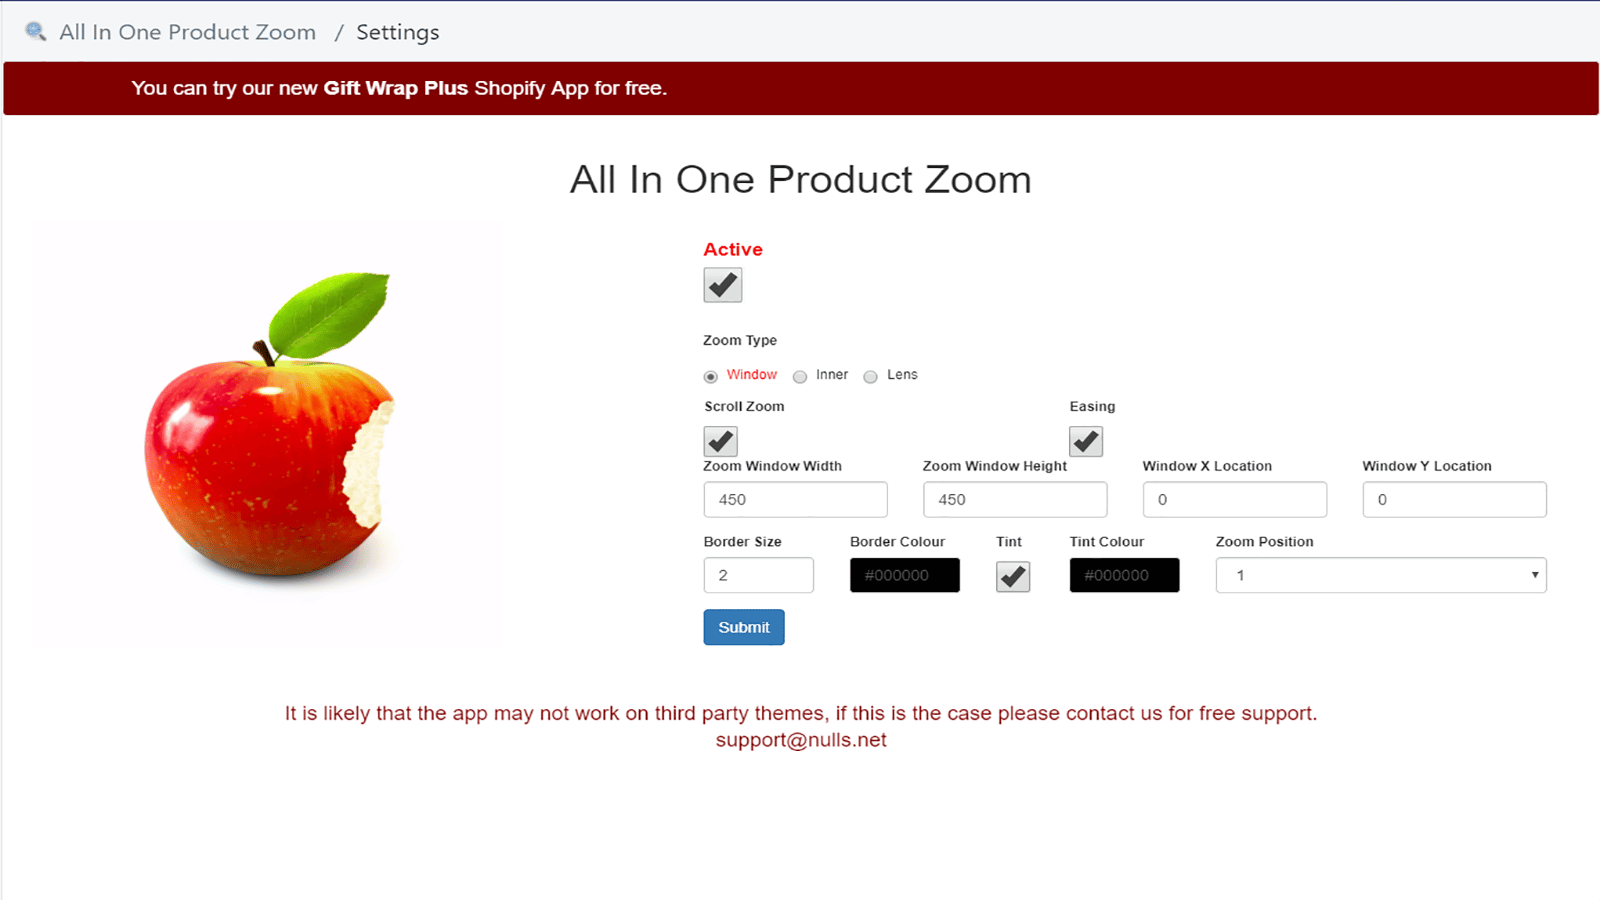 All In One Product Zoom